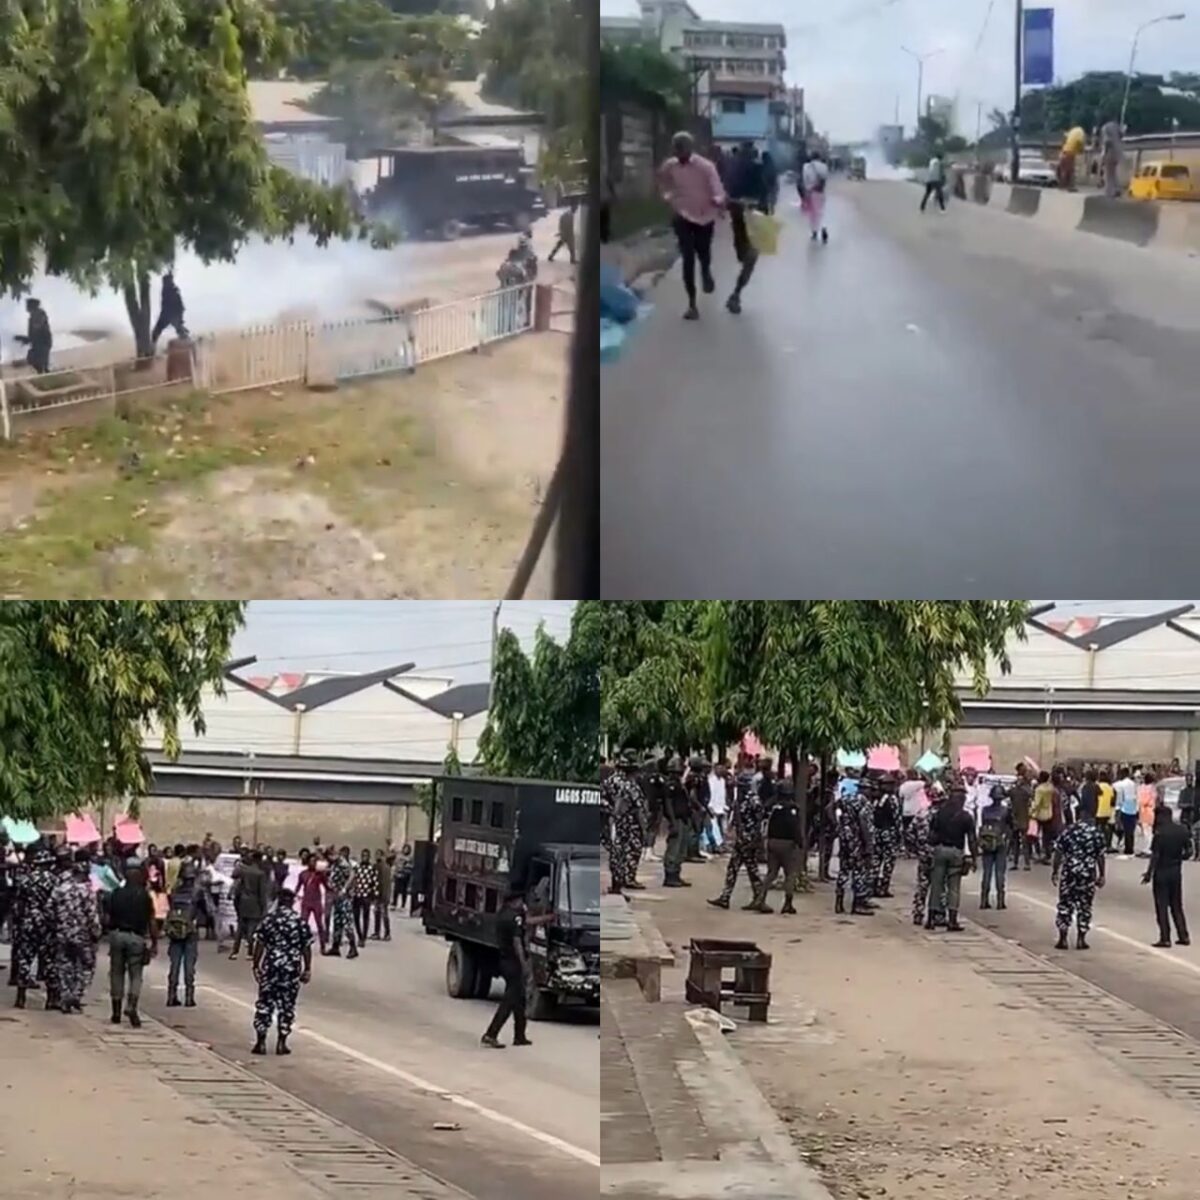 Police fires tear gas as UNILAG students protest hike in school fees (photos/videos)